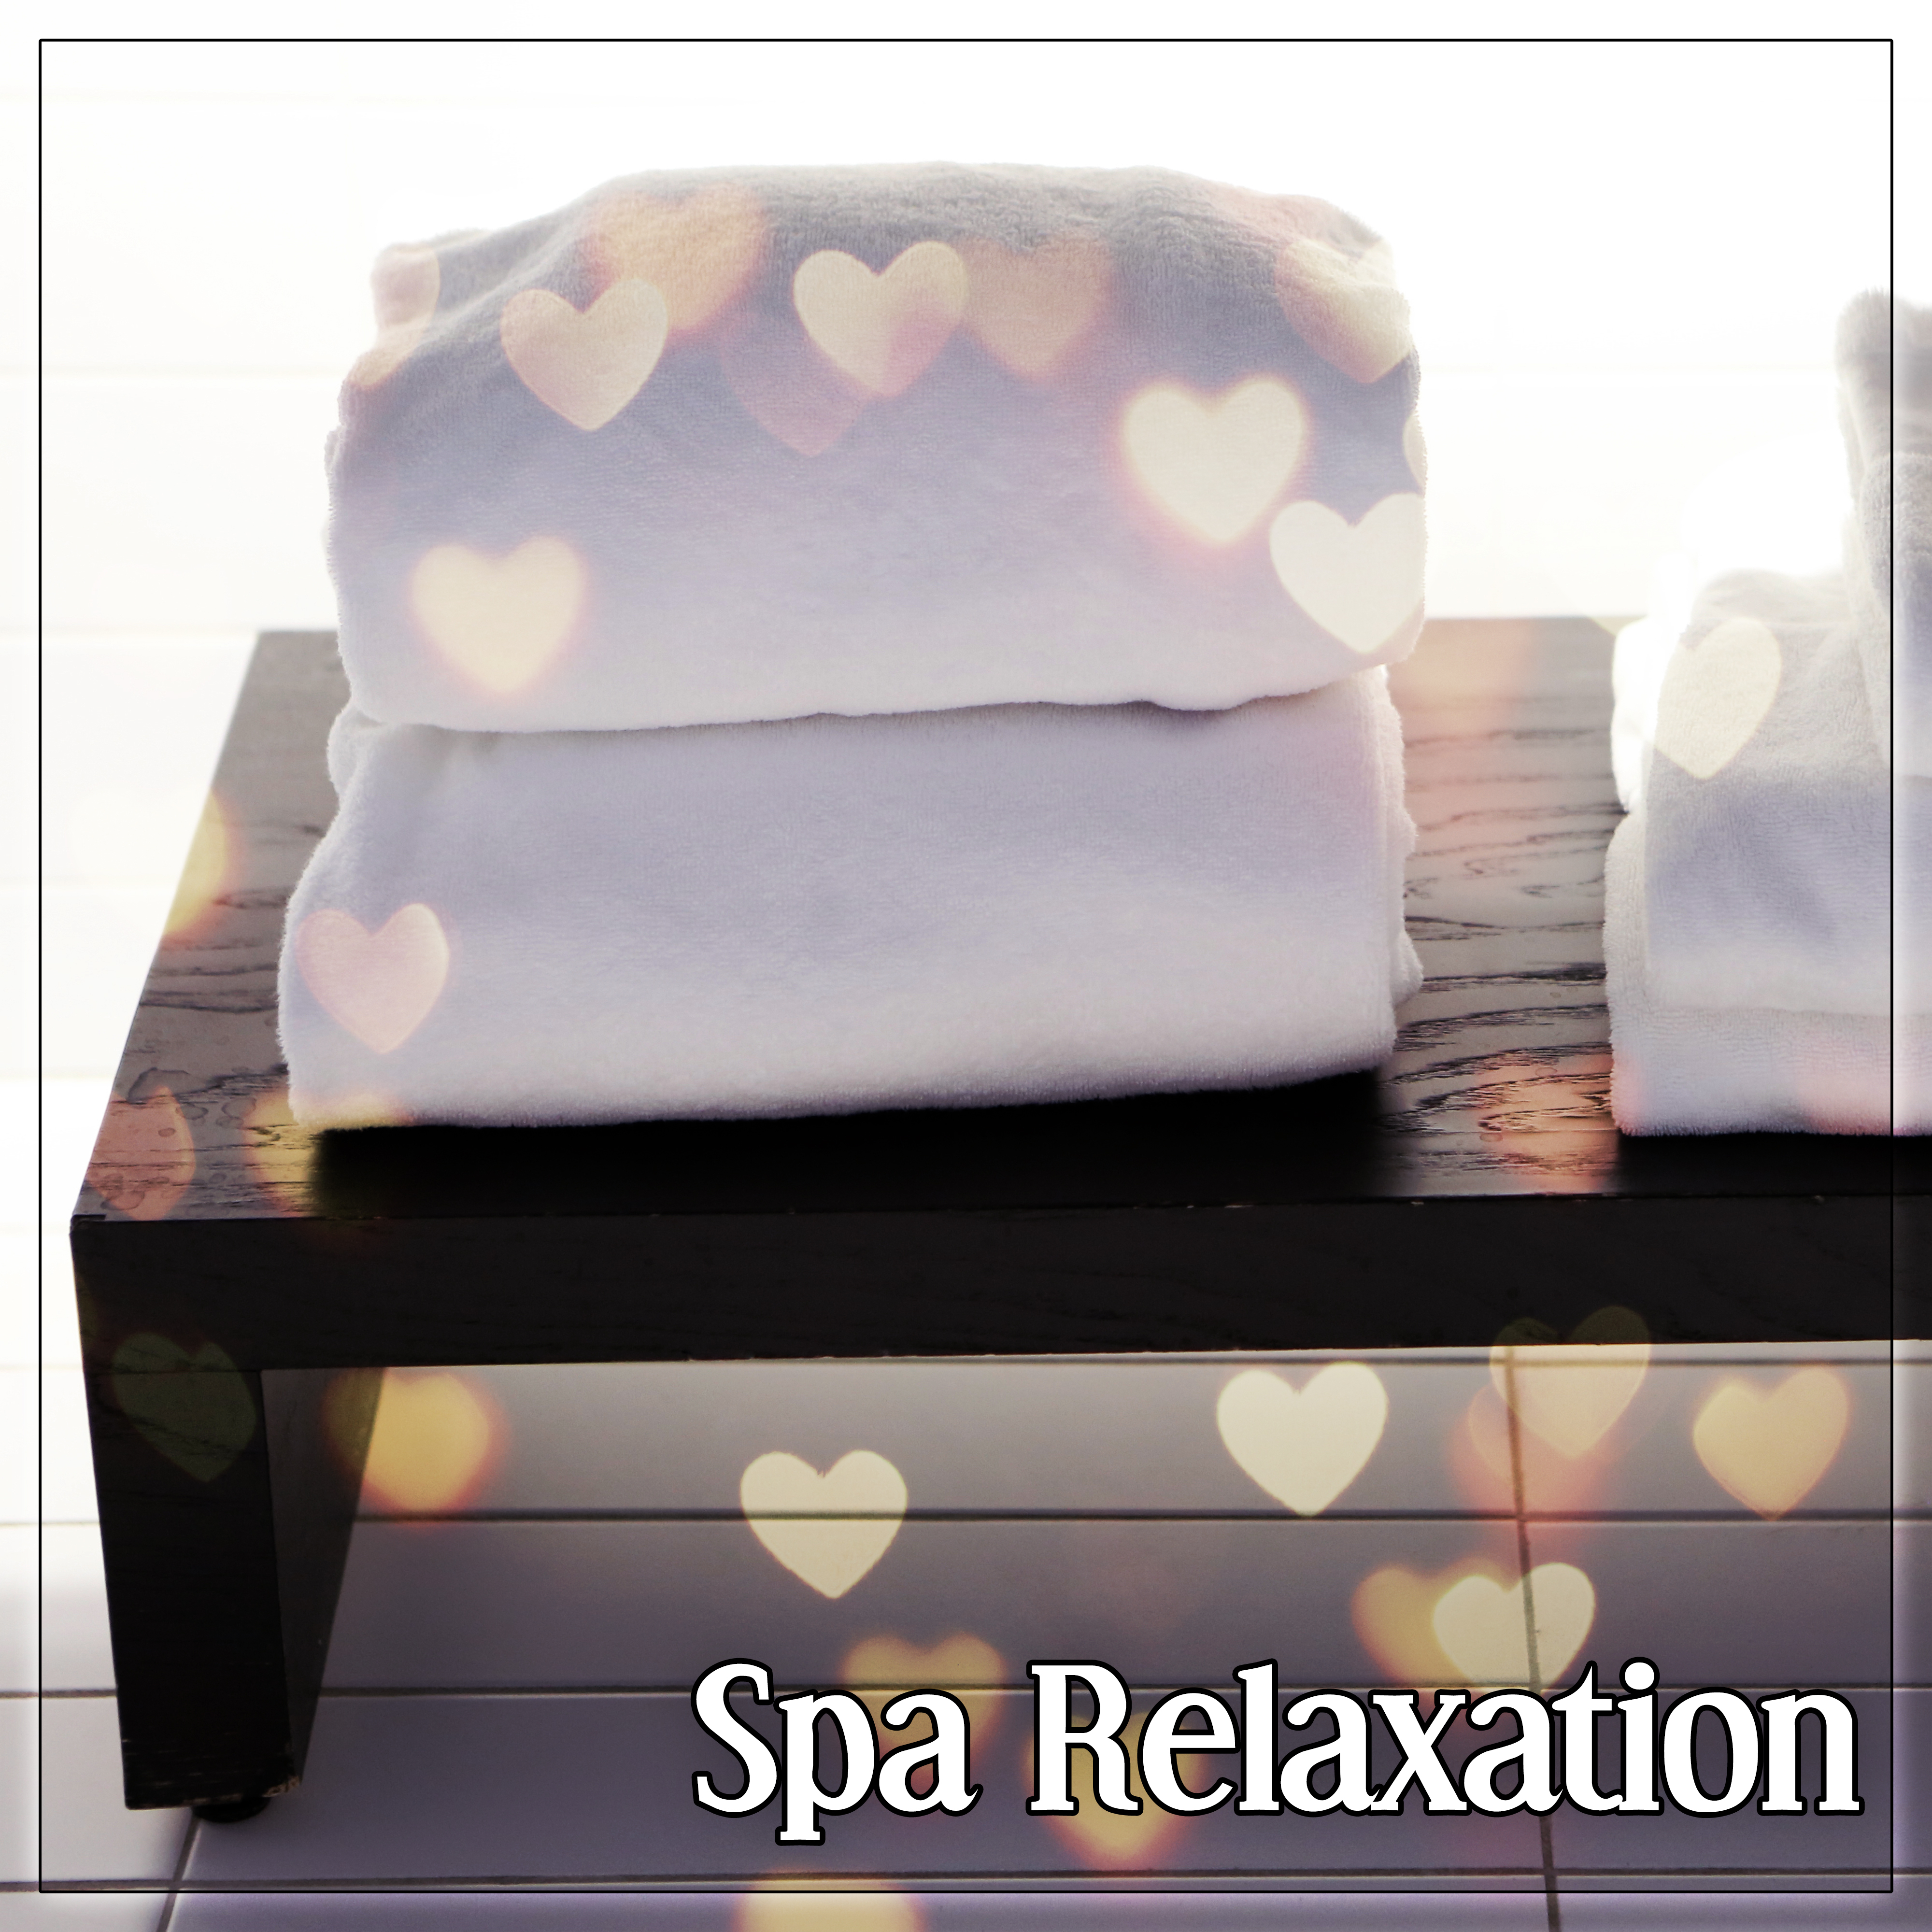 Spa: Relaxation  Organic Spa, Natural Immersion, Resting Sleep, Meadows of Relaxation